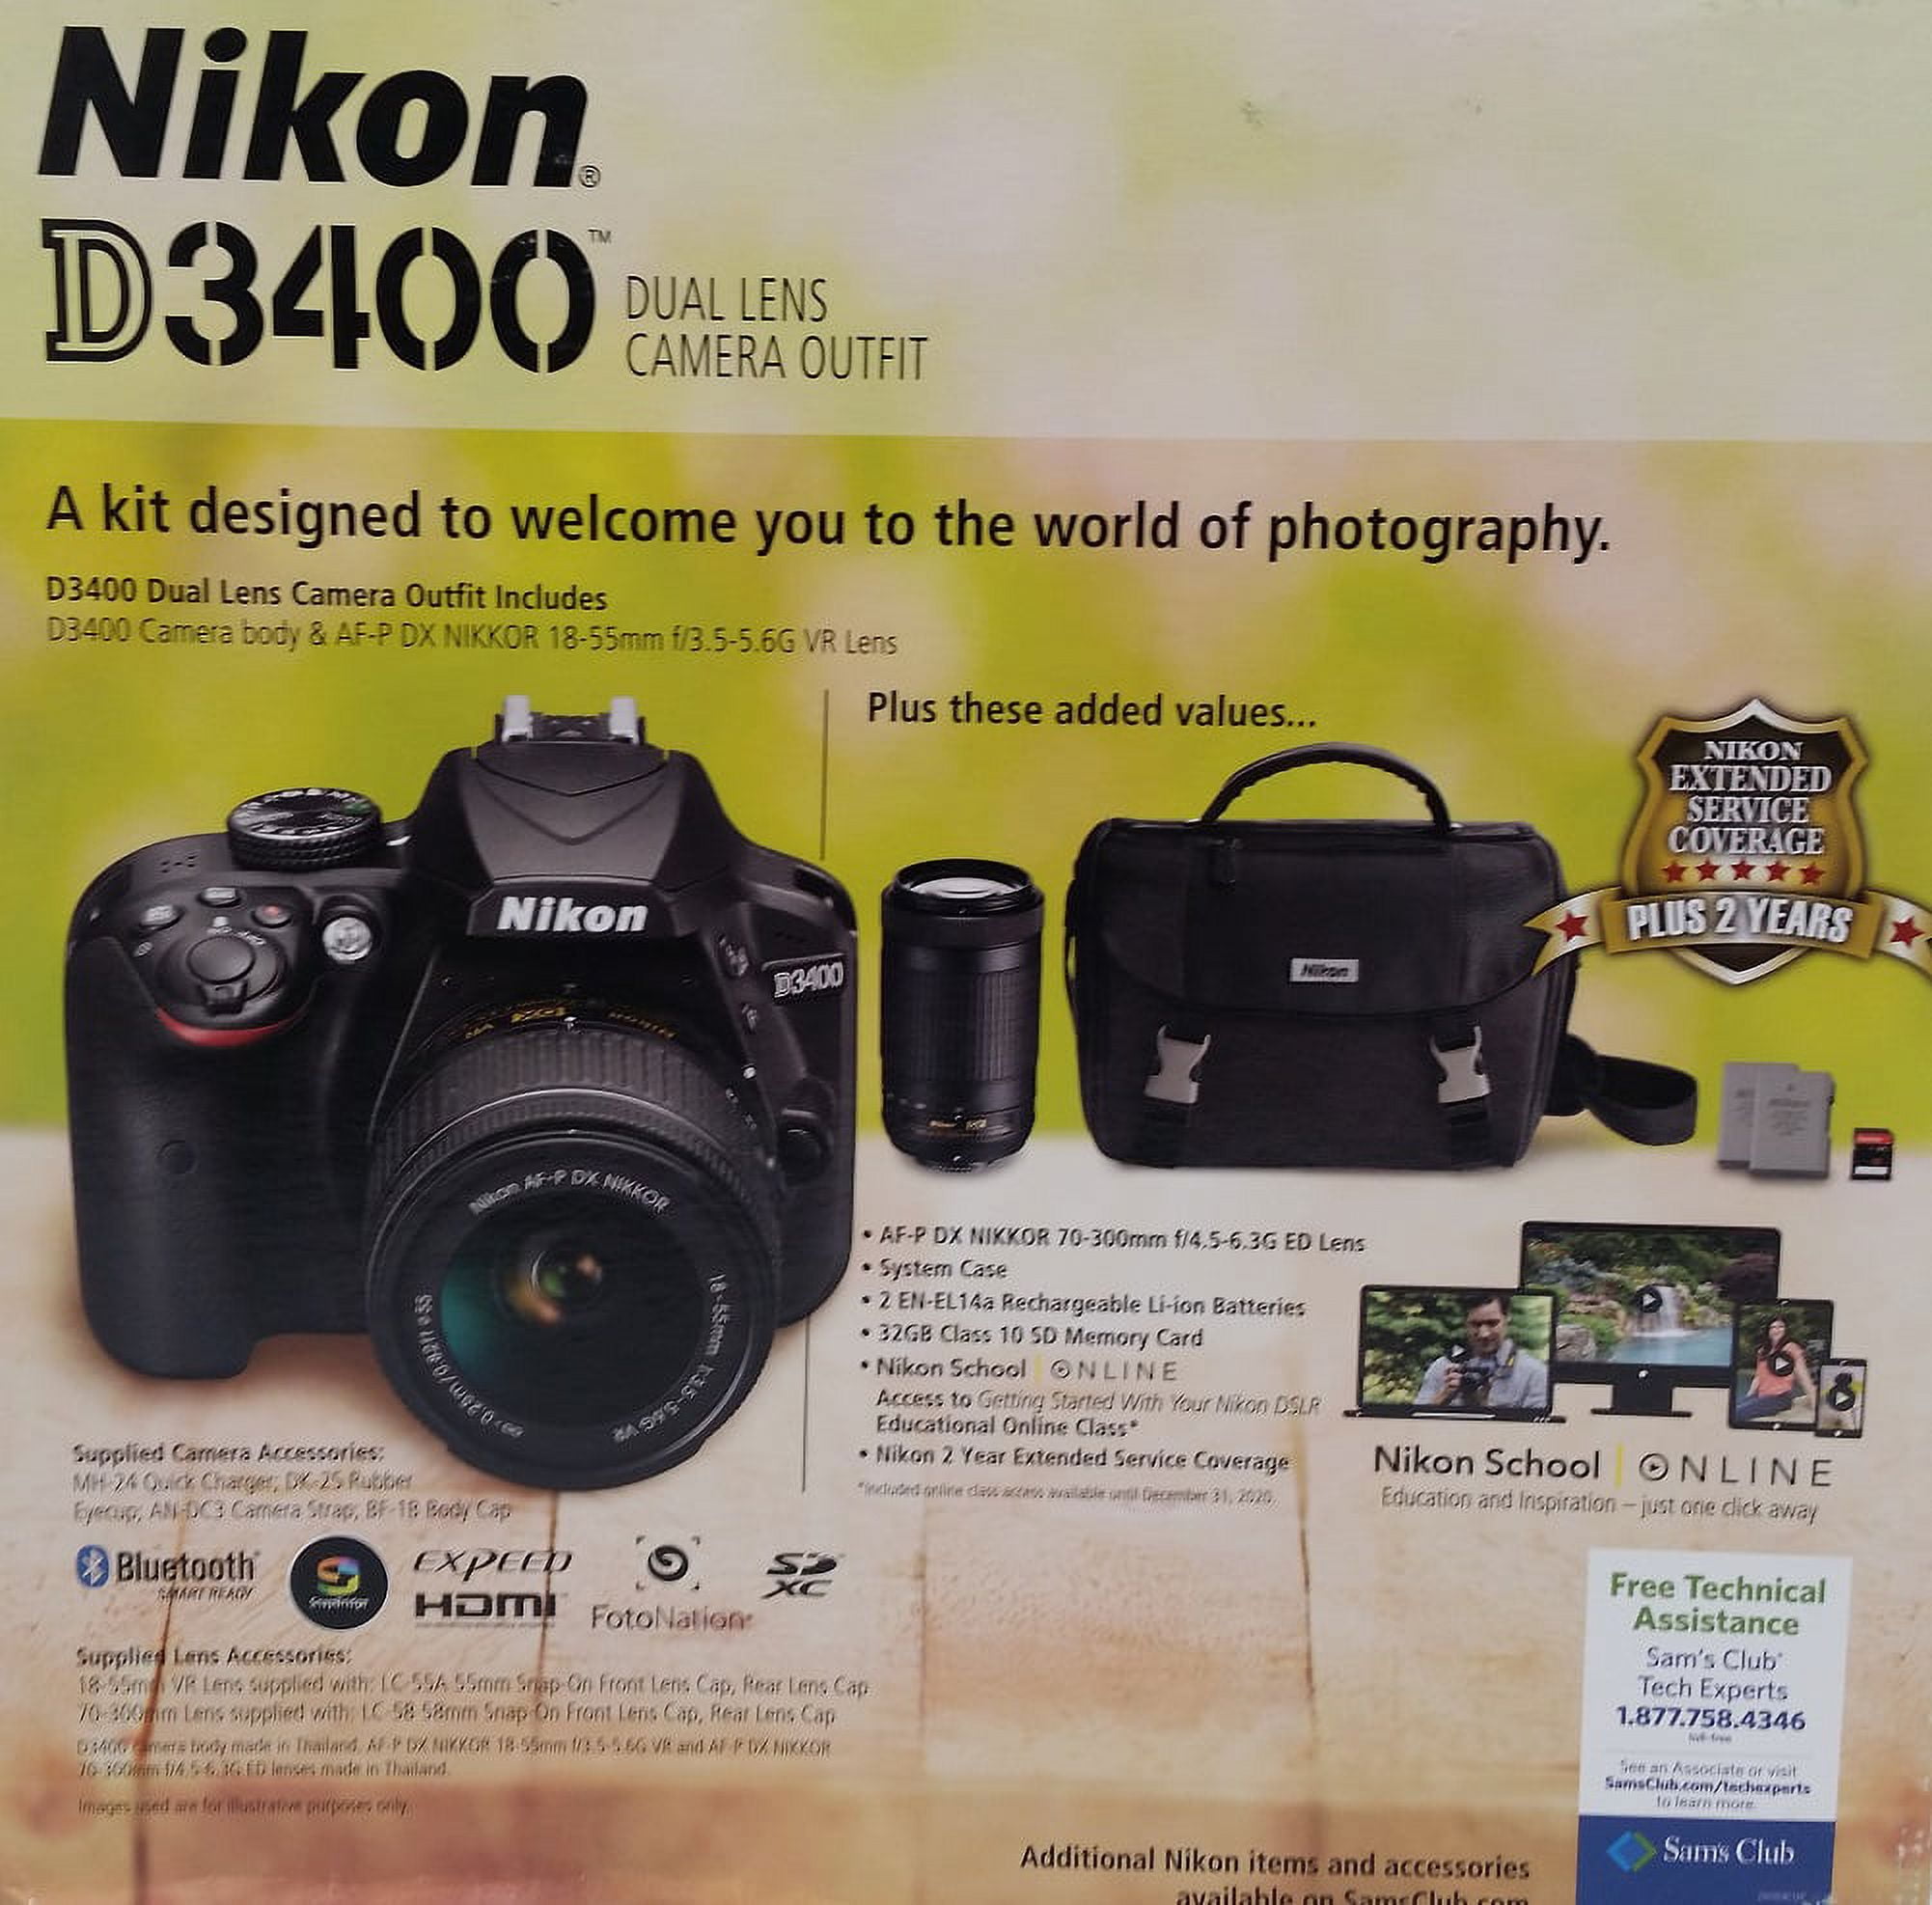 Nikon D3400 DSLR Camera with 18-55mm and 70-300mm Lenses 1573